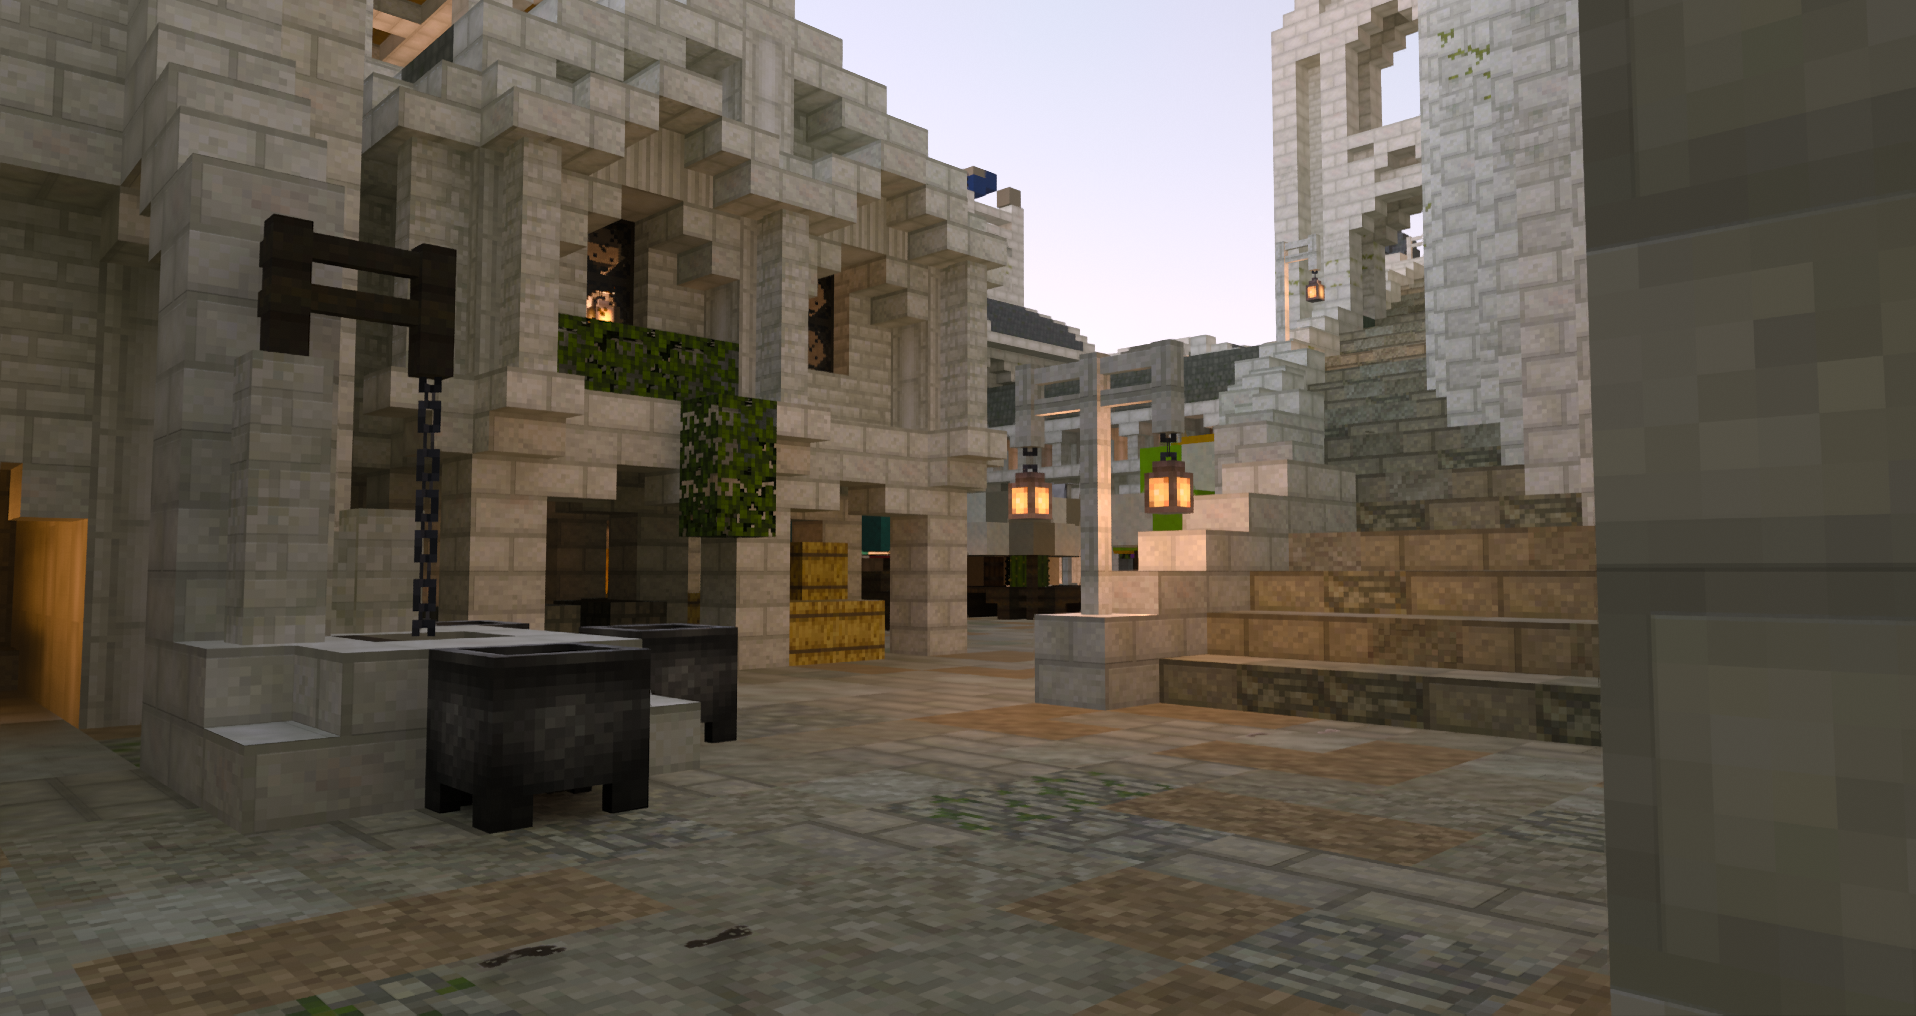 Minecraft with RTX  Minas Tirith by Minecraft Middle-Earth Minecraft Map